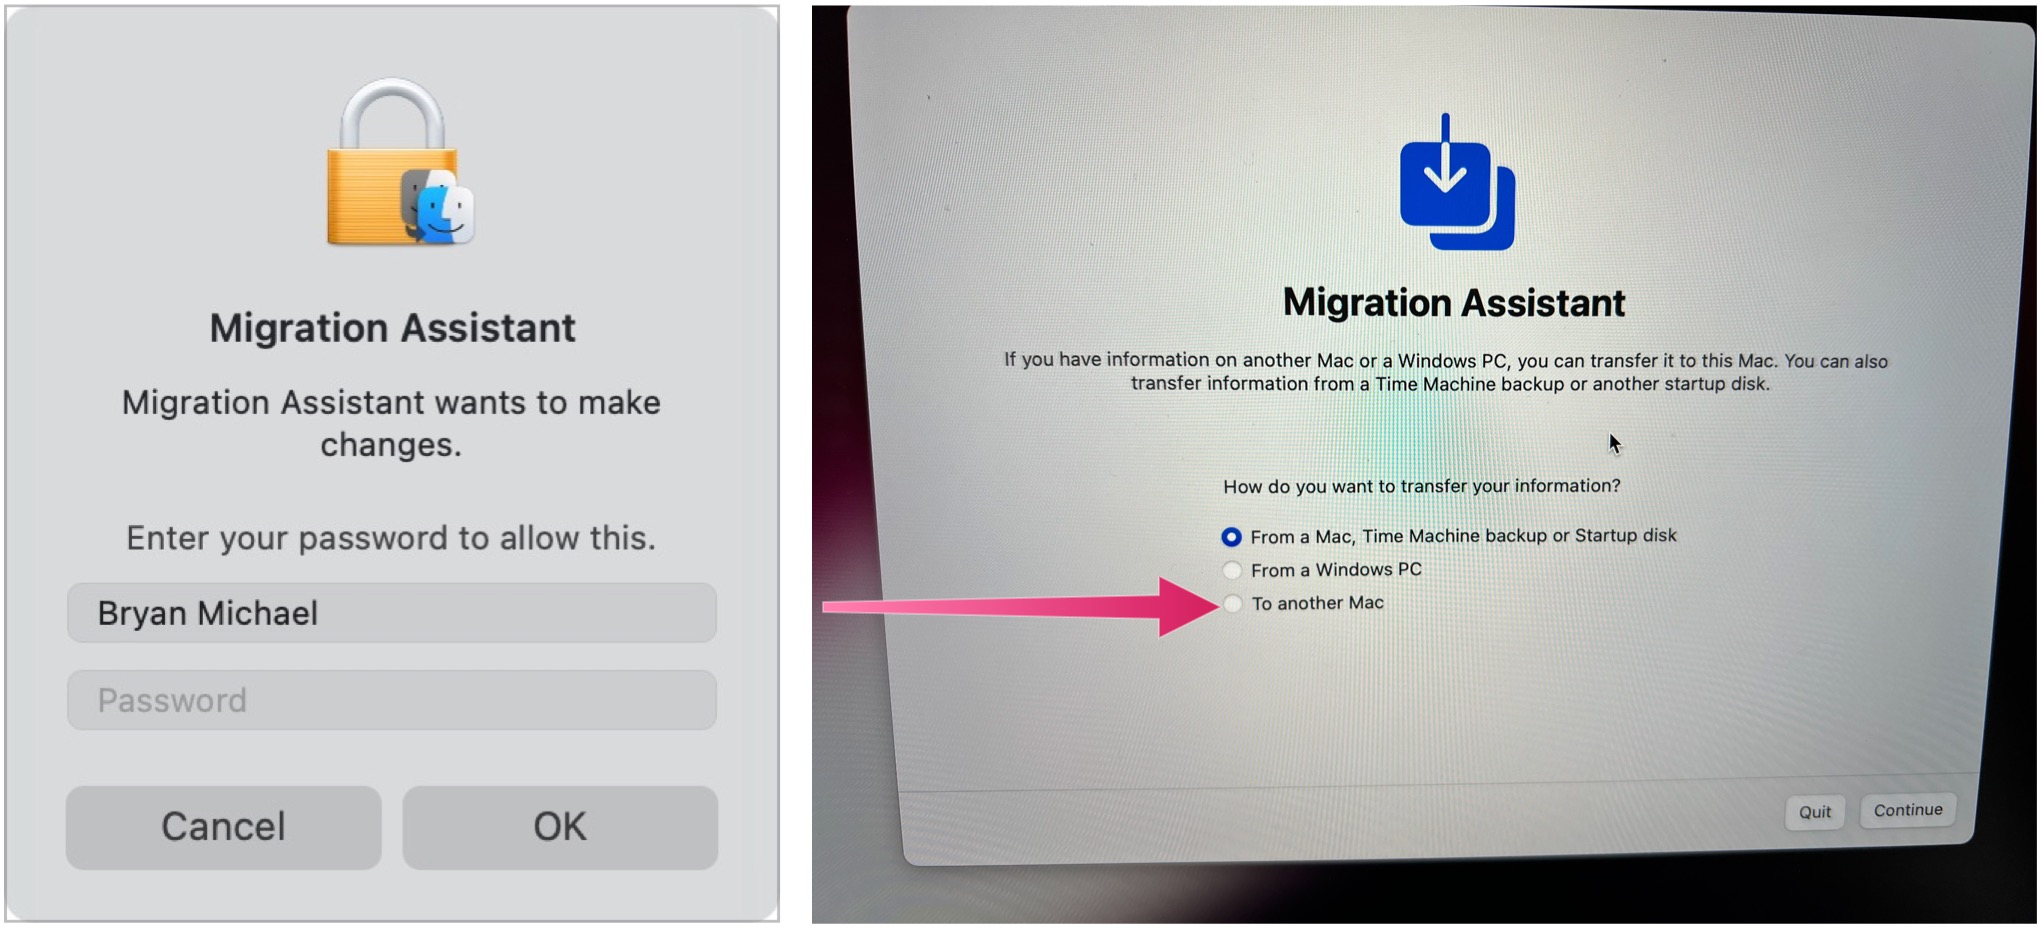 To transfer data to new Mac using Migration Assistant, click Continue. Then log into your Mac account. Select the option to transfer to another Mac.Click Continue.